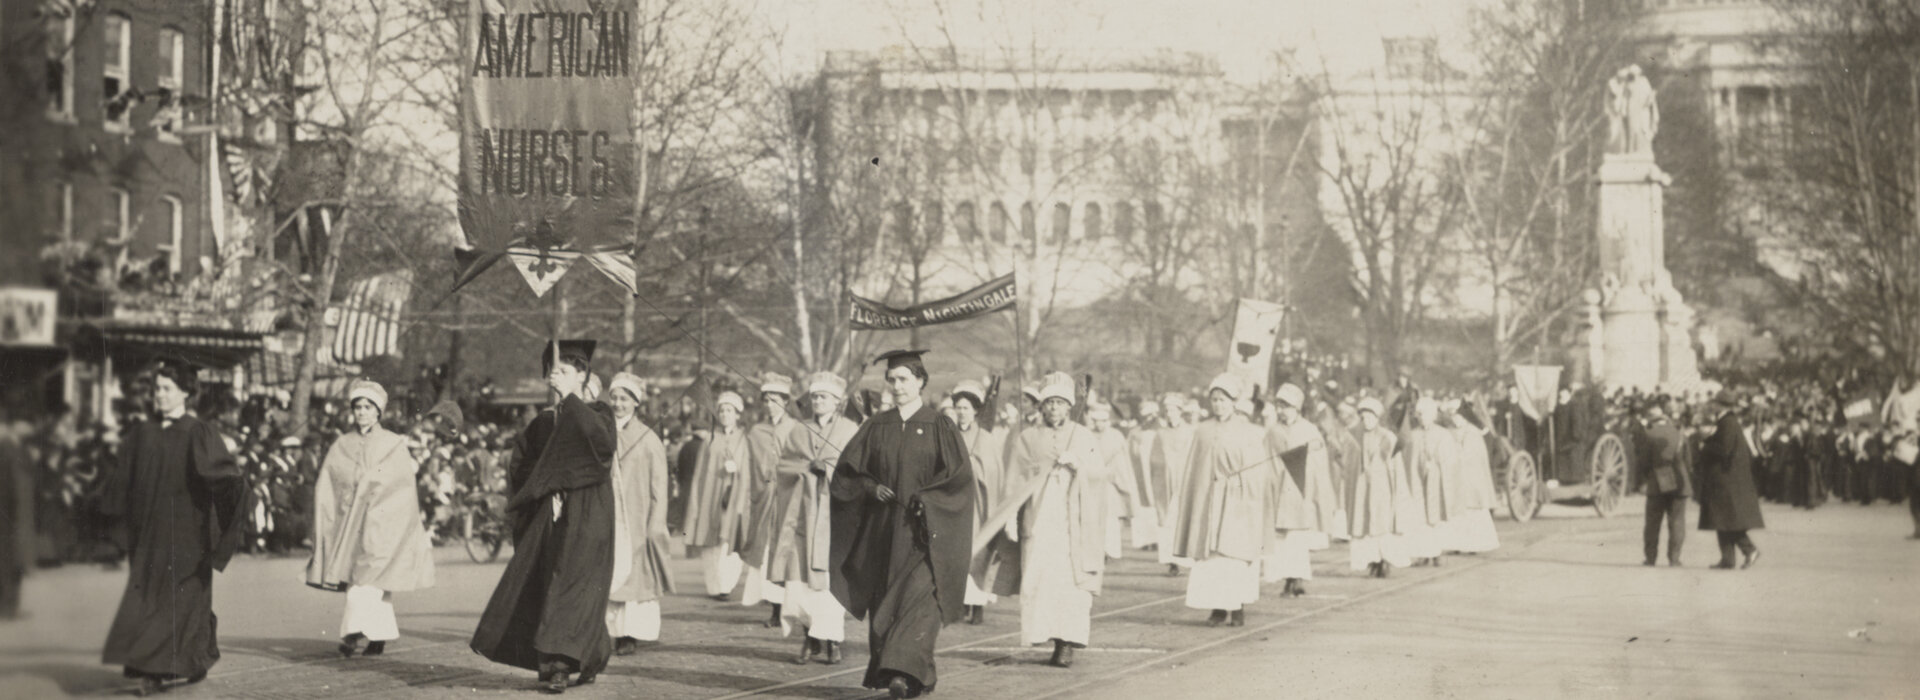 In Pursuit of Knowledge and Justice: The Shared Growth of the Nursing  Profession and the Suffrage Movement